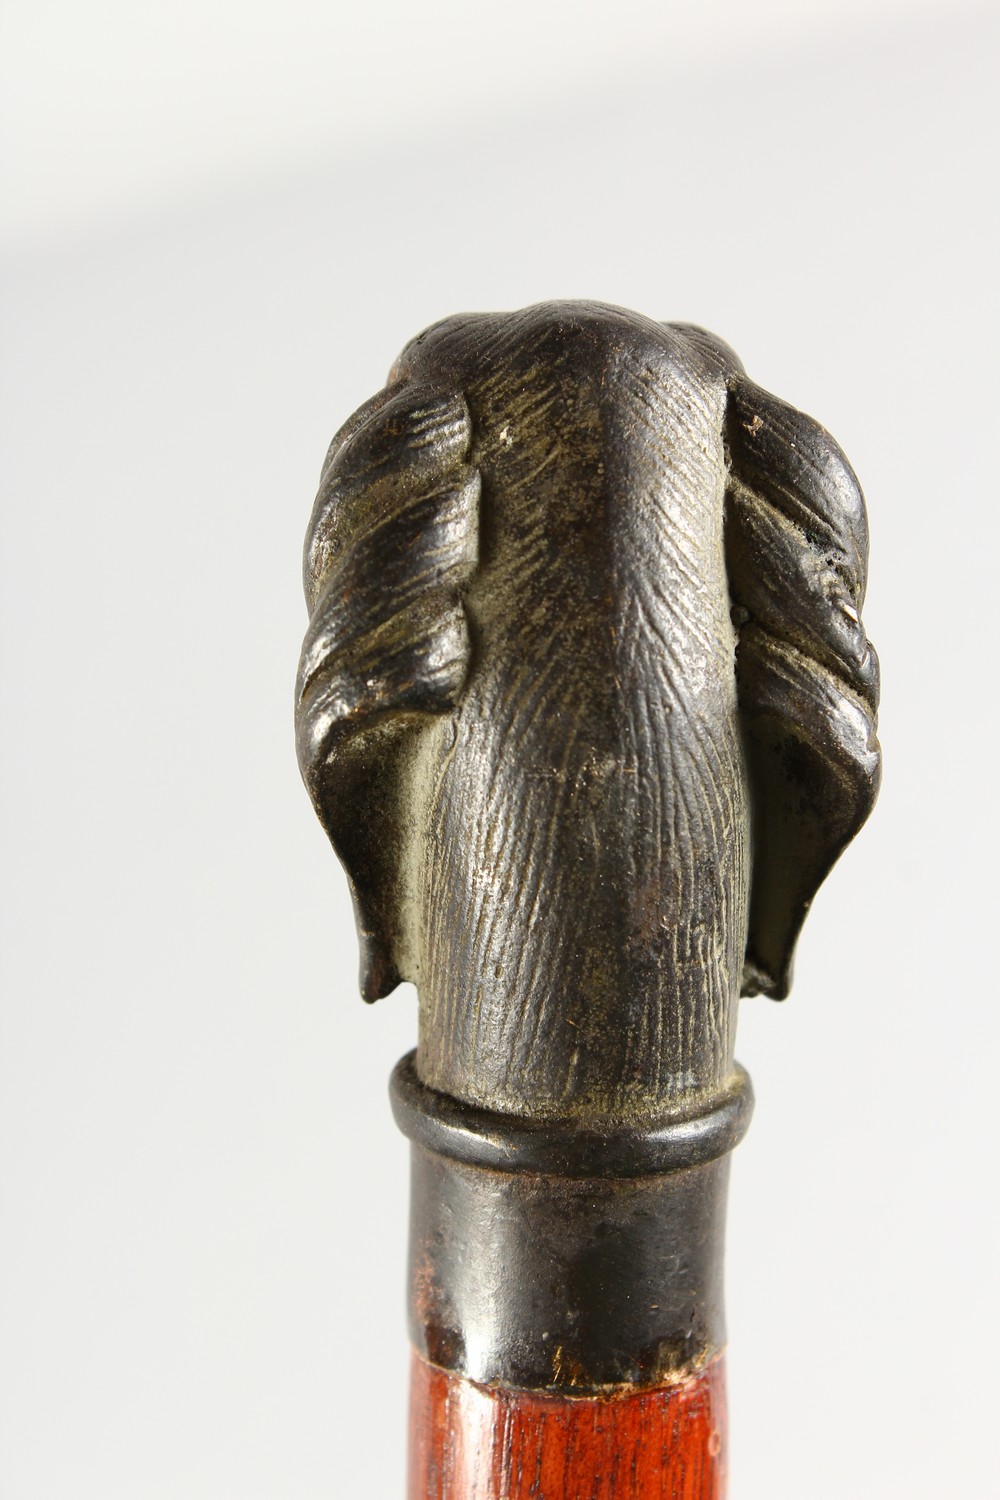 A GOOD WOODEN WALKING STICK with metal handle, head of a dog. - Image 4 of 8